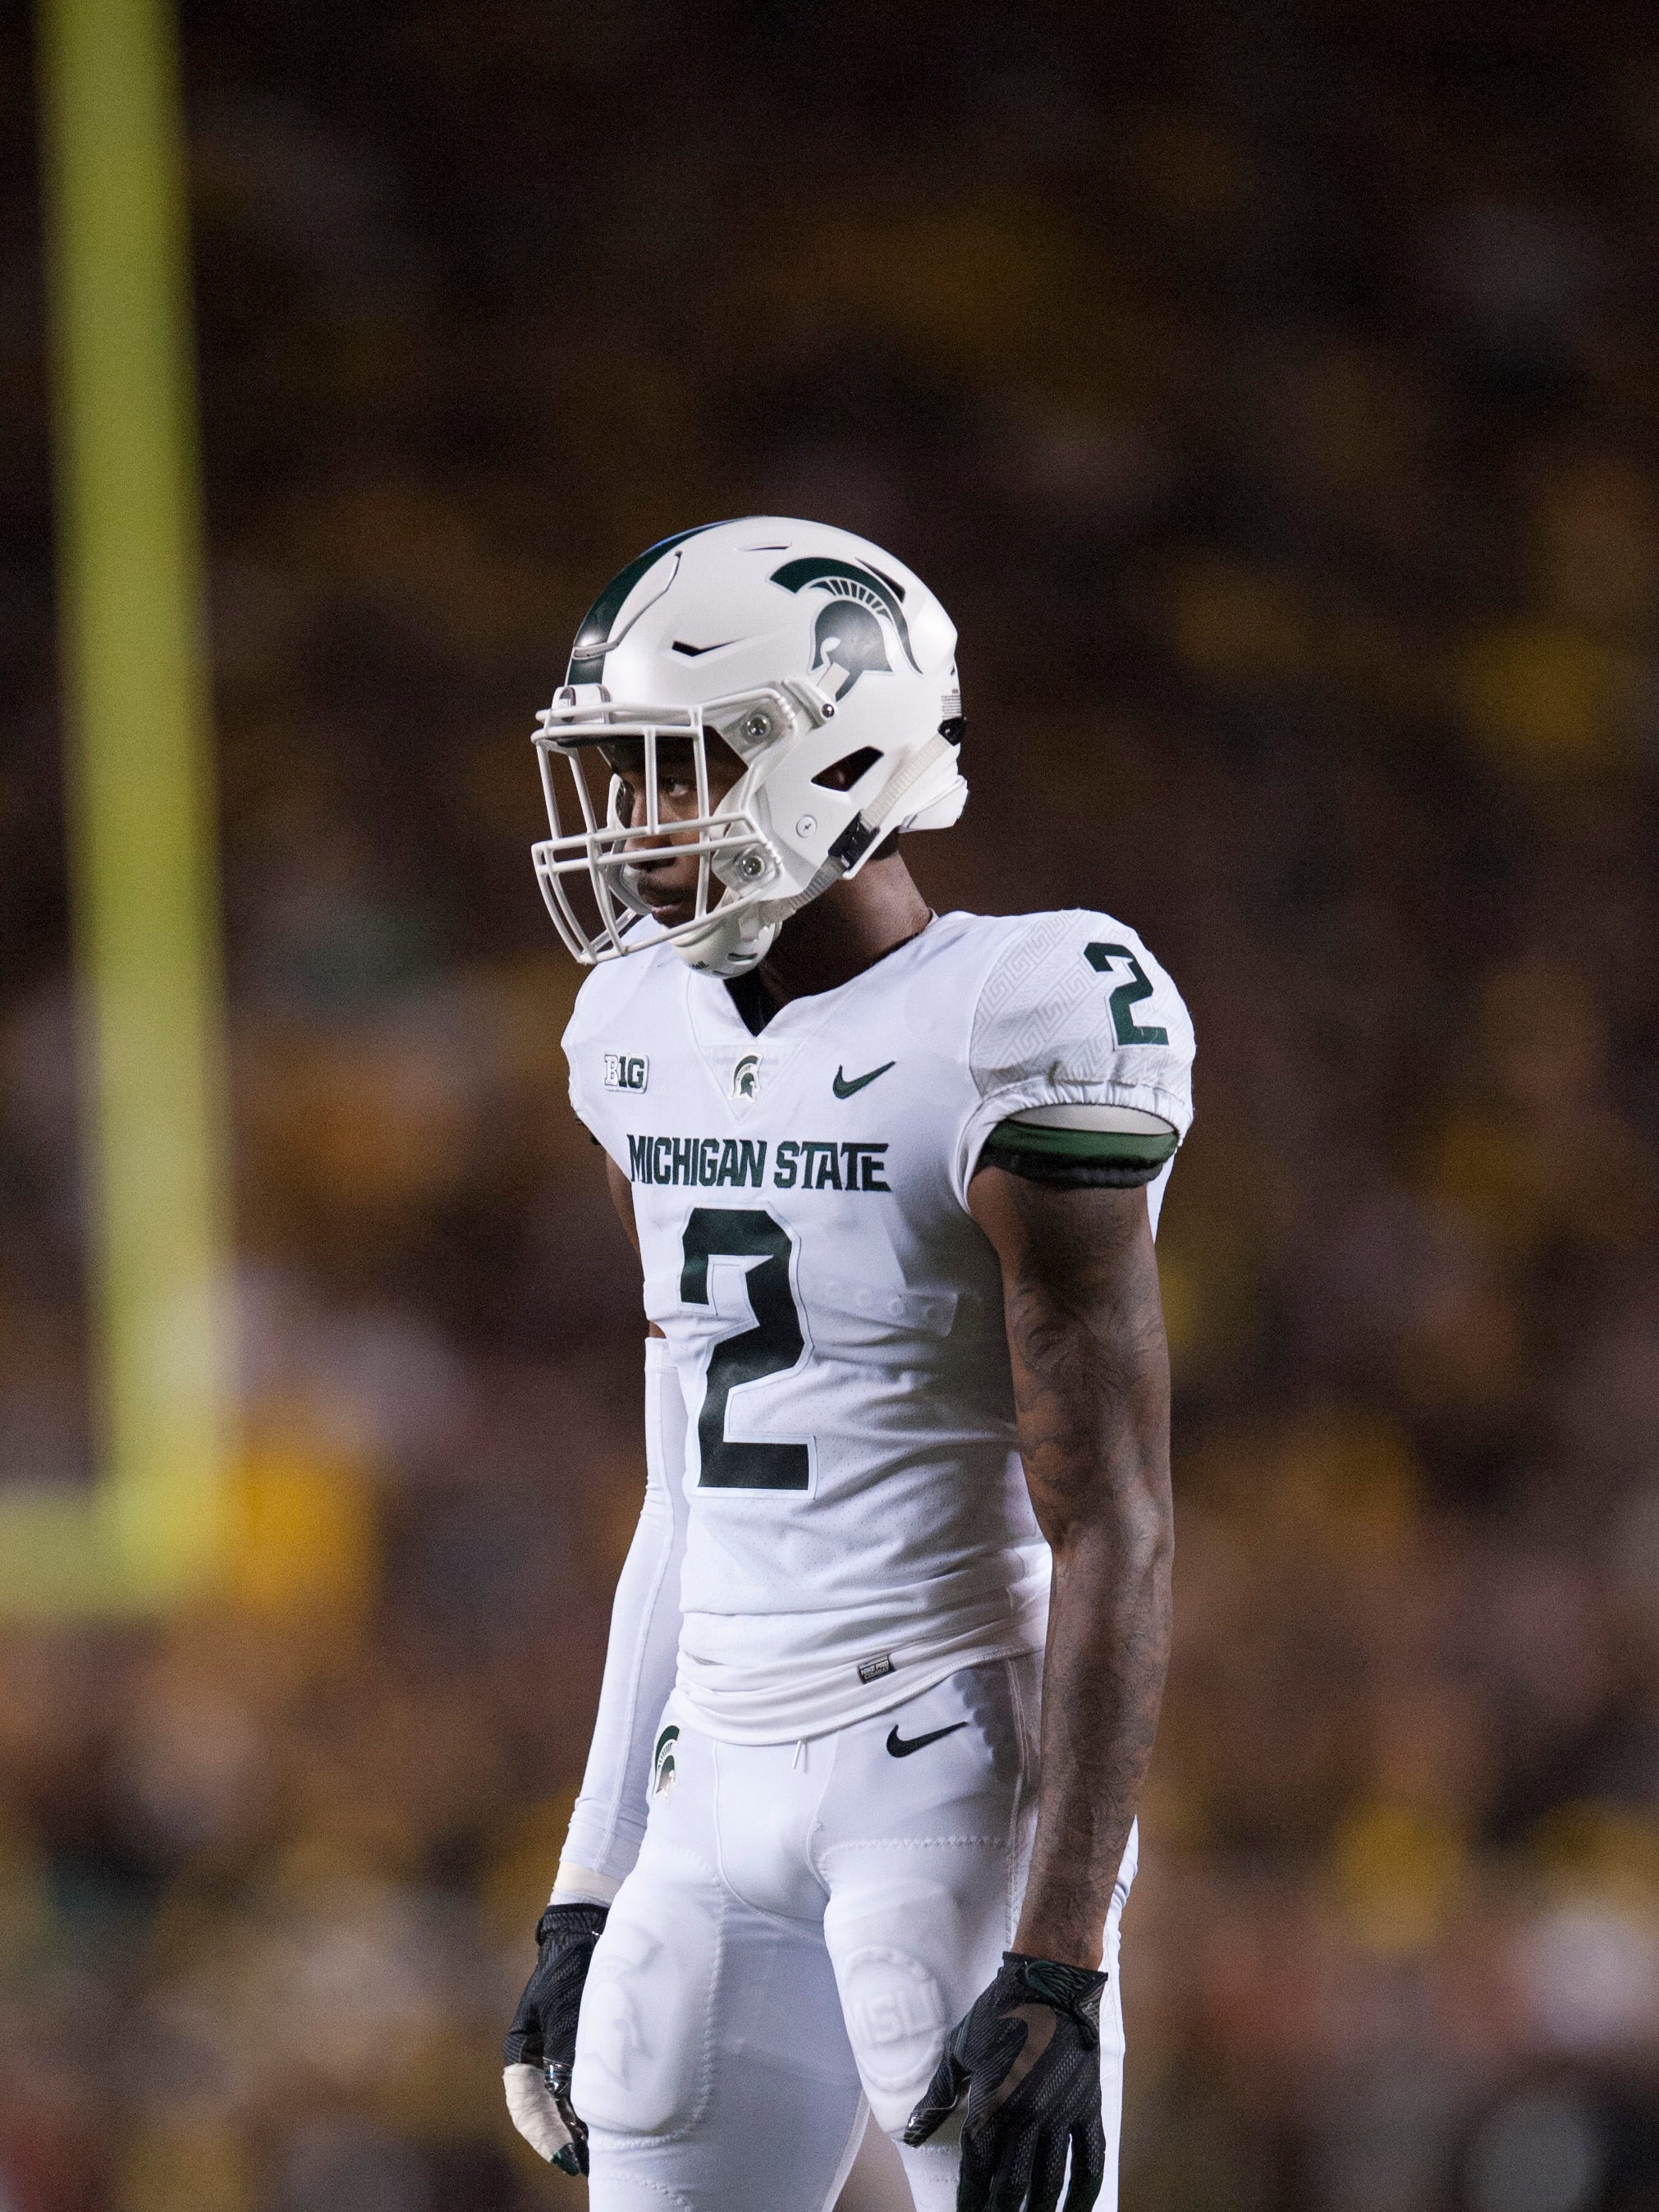 Cornerback – Justin Layne, Jr. Layne is the clear choice after breaking up eight passes and grabbing an interception last season while earning honorable mention All-Big Ten honors. He'll likely be backed up by junior Josh Butler, who has starting experience and will see plenty of playing time. Also keep an eye on sophomore Tre Person and redshirt freshman Jiah Norman.